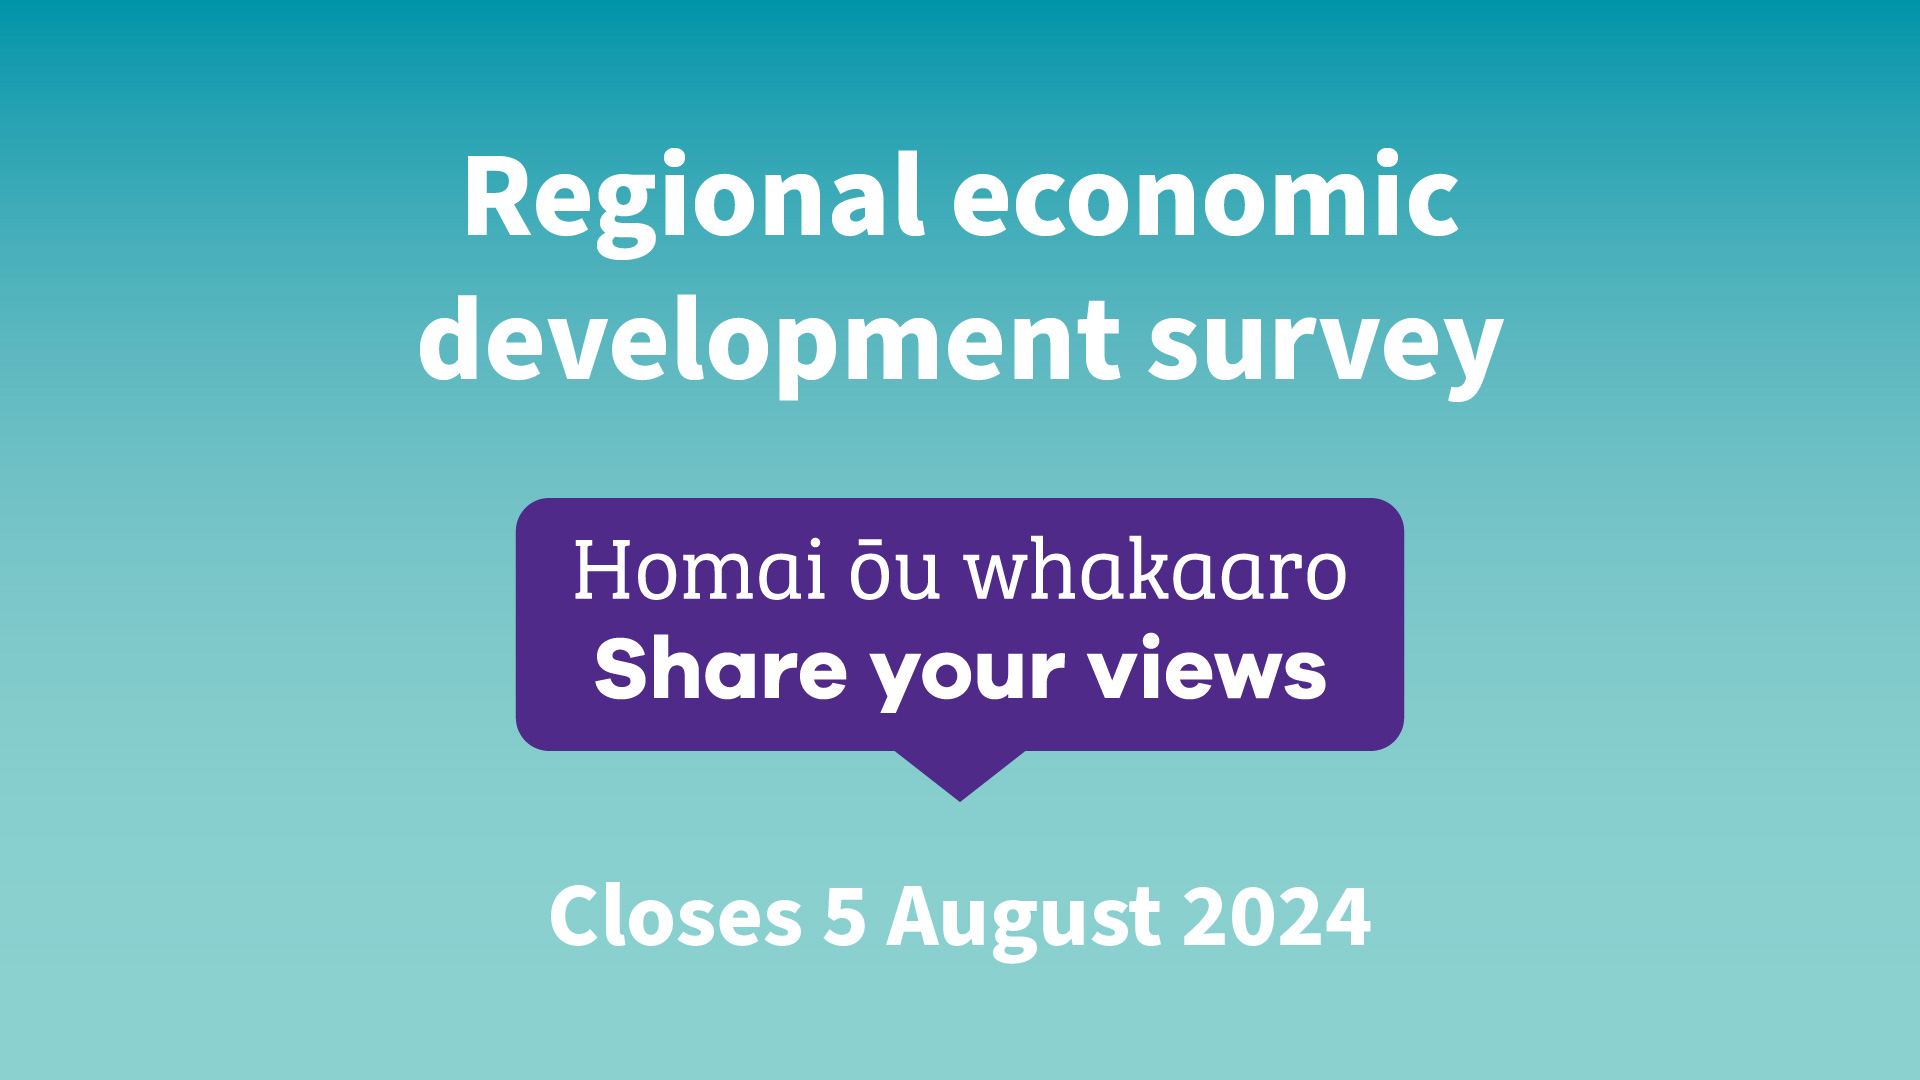 SHARE YOUR VIEWS: We want to understand people’s views on the priorities and future opportunities for economic development in the Waikato region. If you have an interest in or benefit from economic development, please complete our survey. It takes 5-10 minutes.